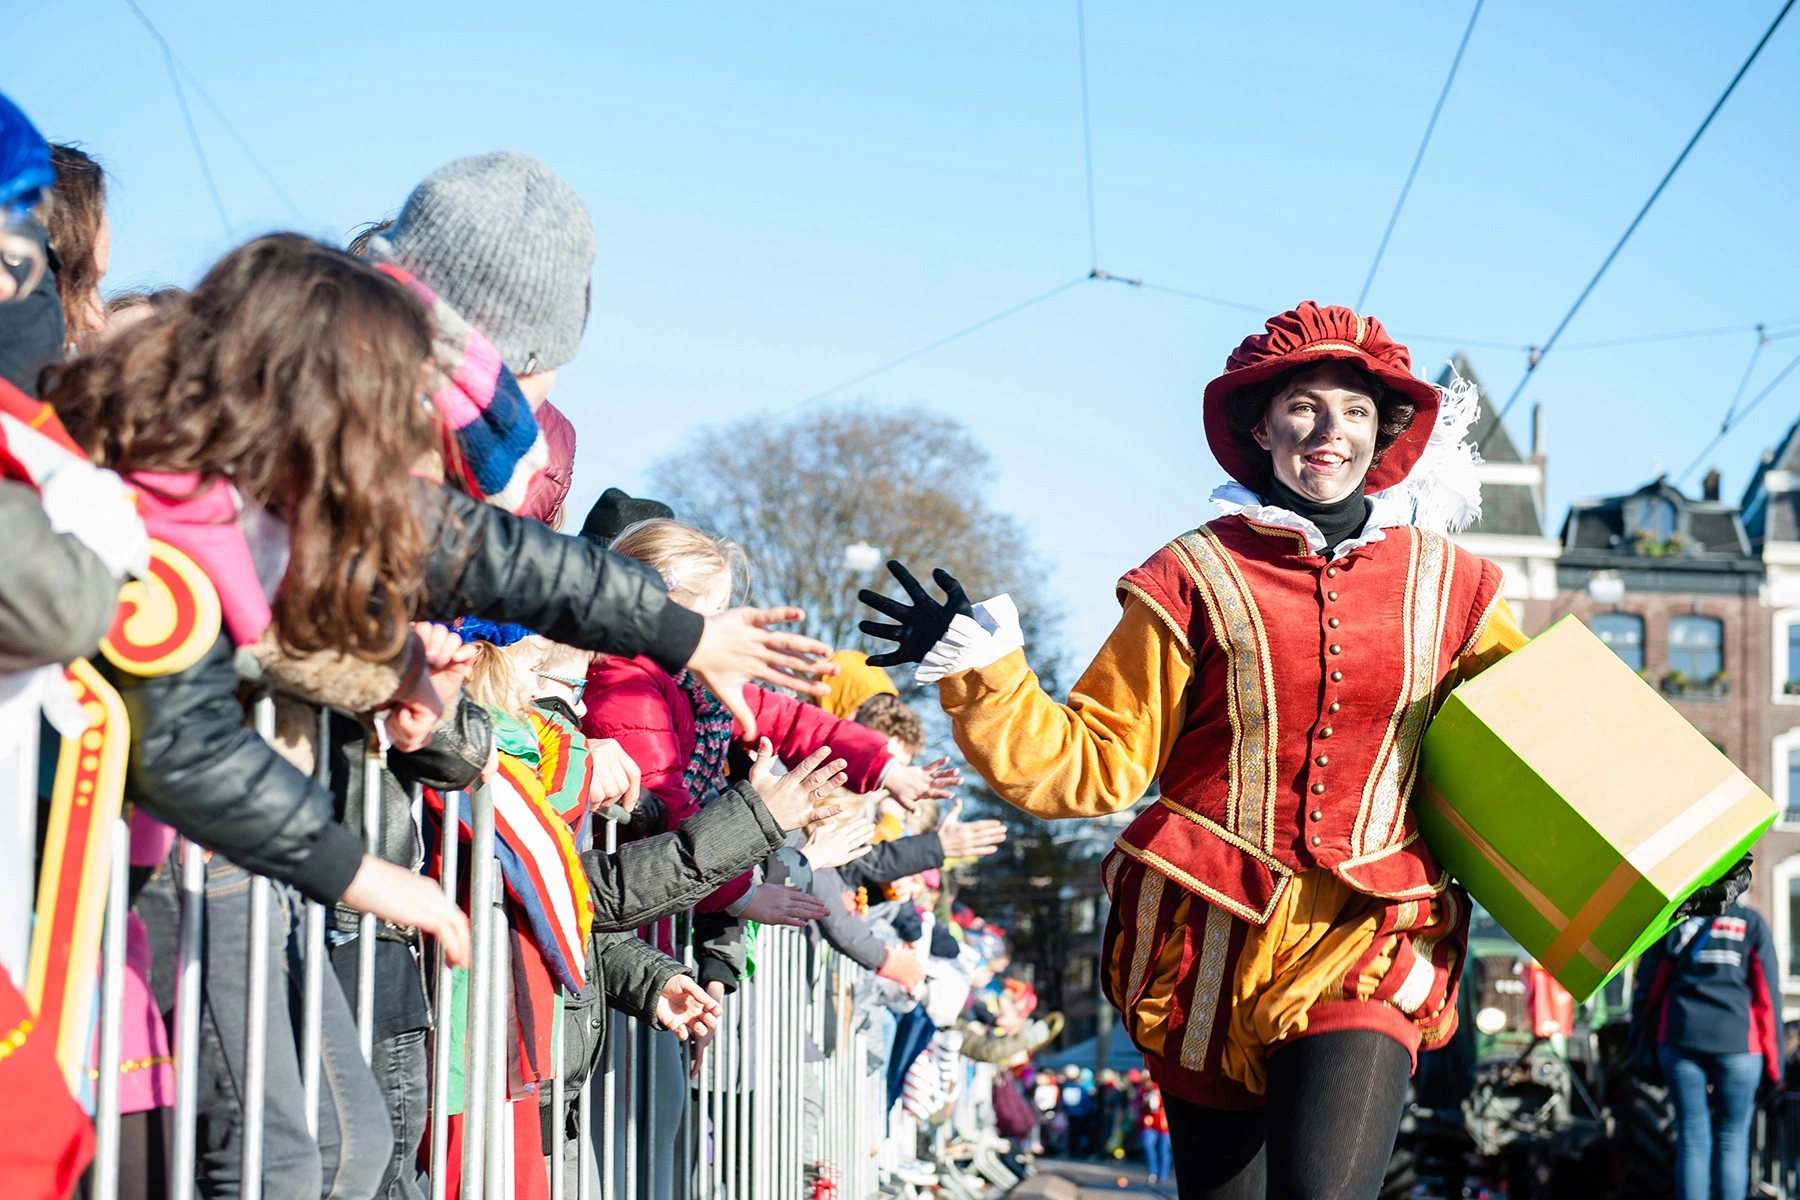 Sooty Pete is giving high fives to a bunch of kids who are waiting for Sinterklaas to arrive in Amsterdam